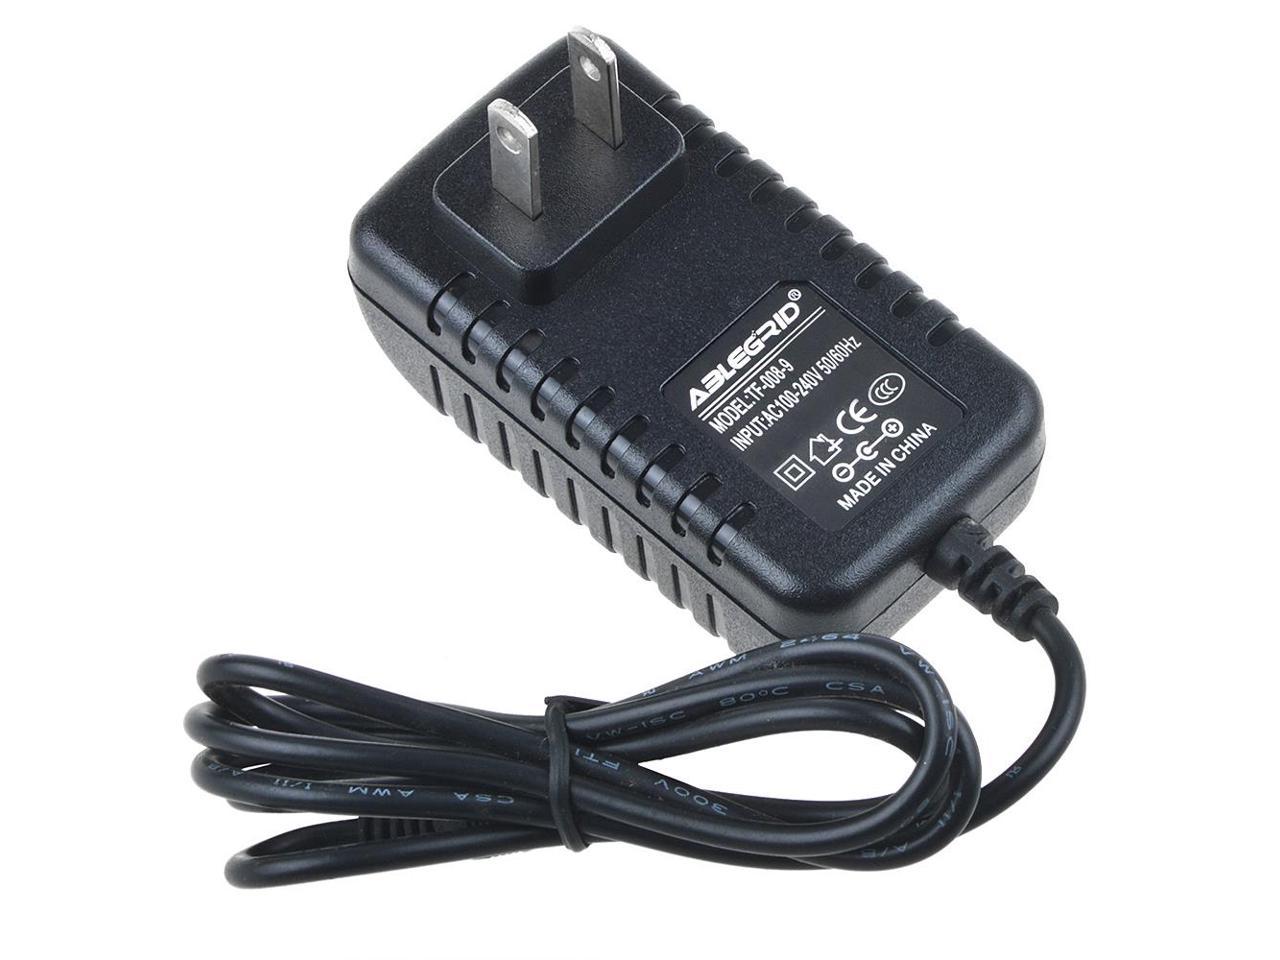 AC Adapter For Shark Cordless 15.6Volts 15.6V Pet Perfect Hand Vac Cleaner Power 